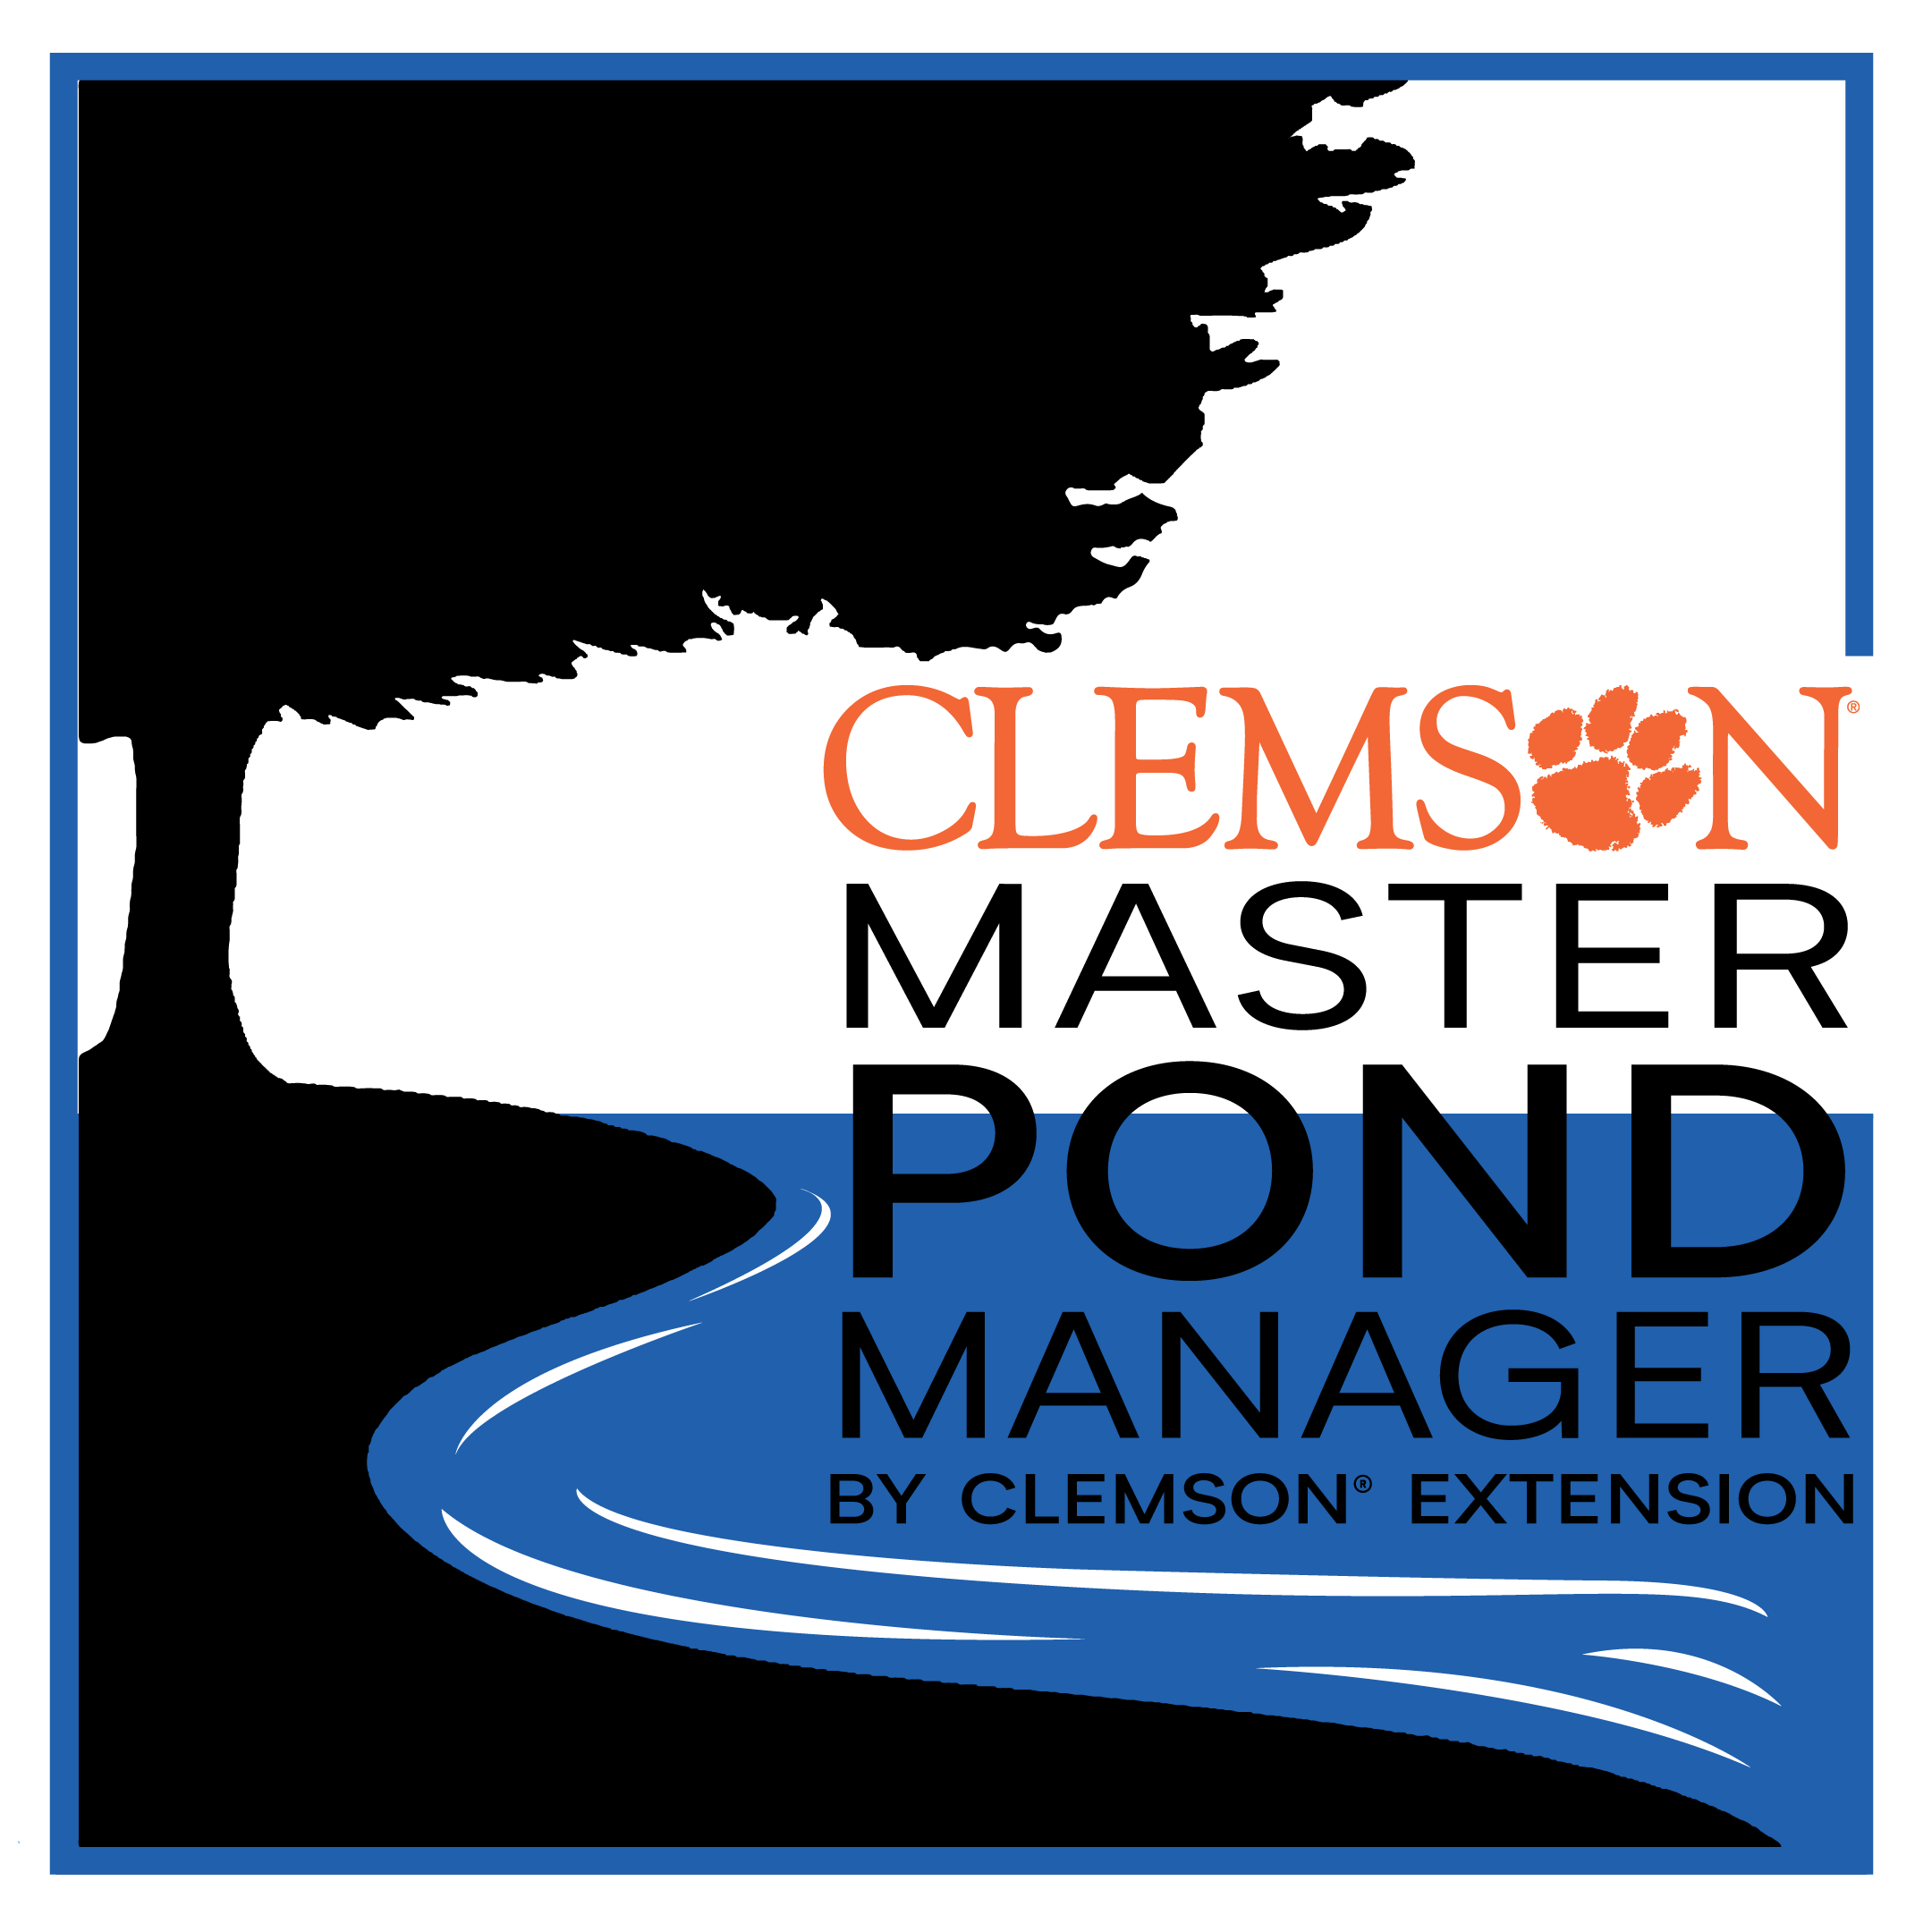 Clemson Master Pond Manager by clemson extension